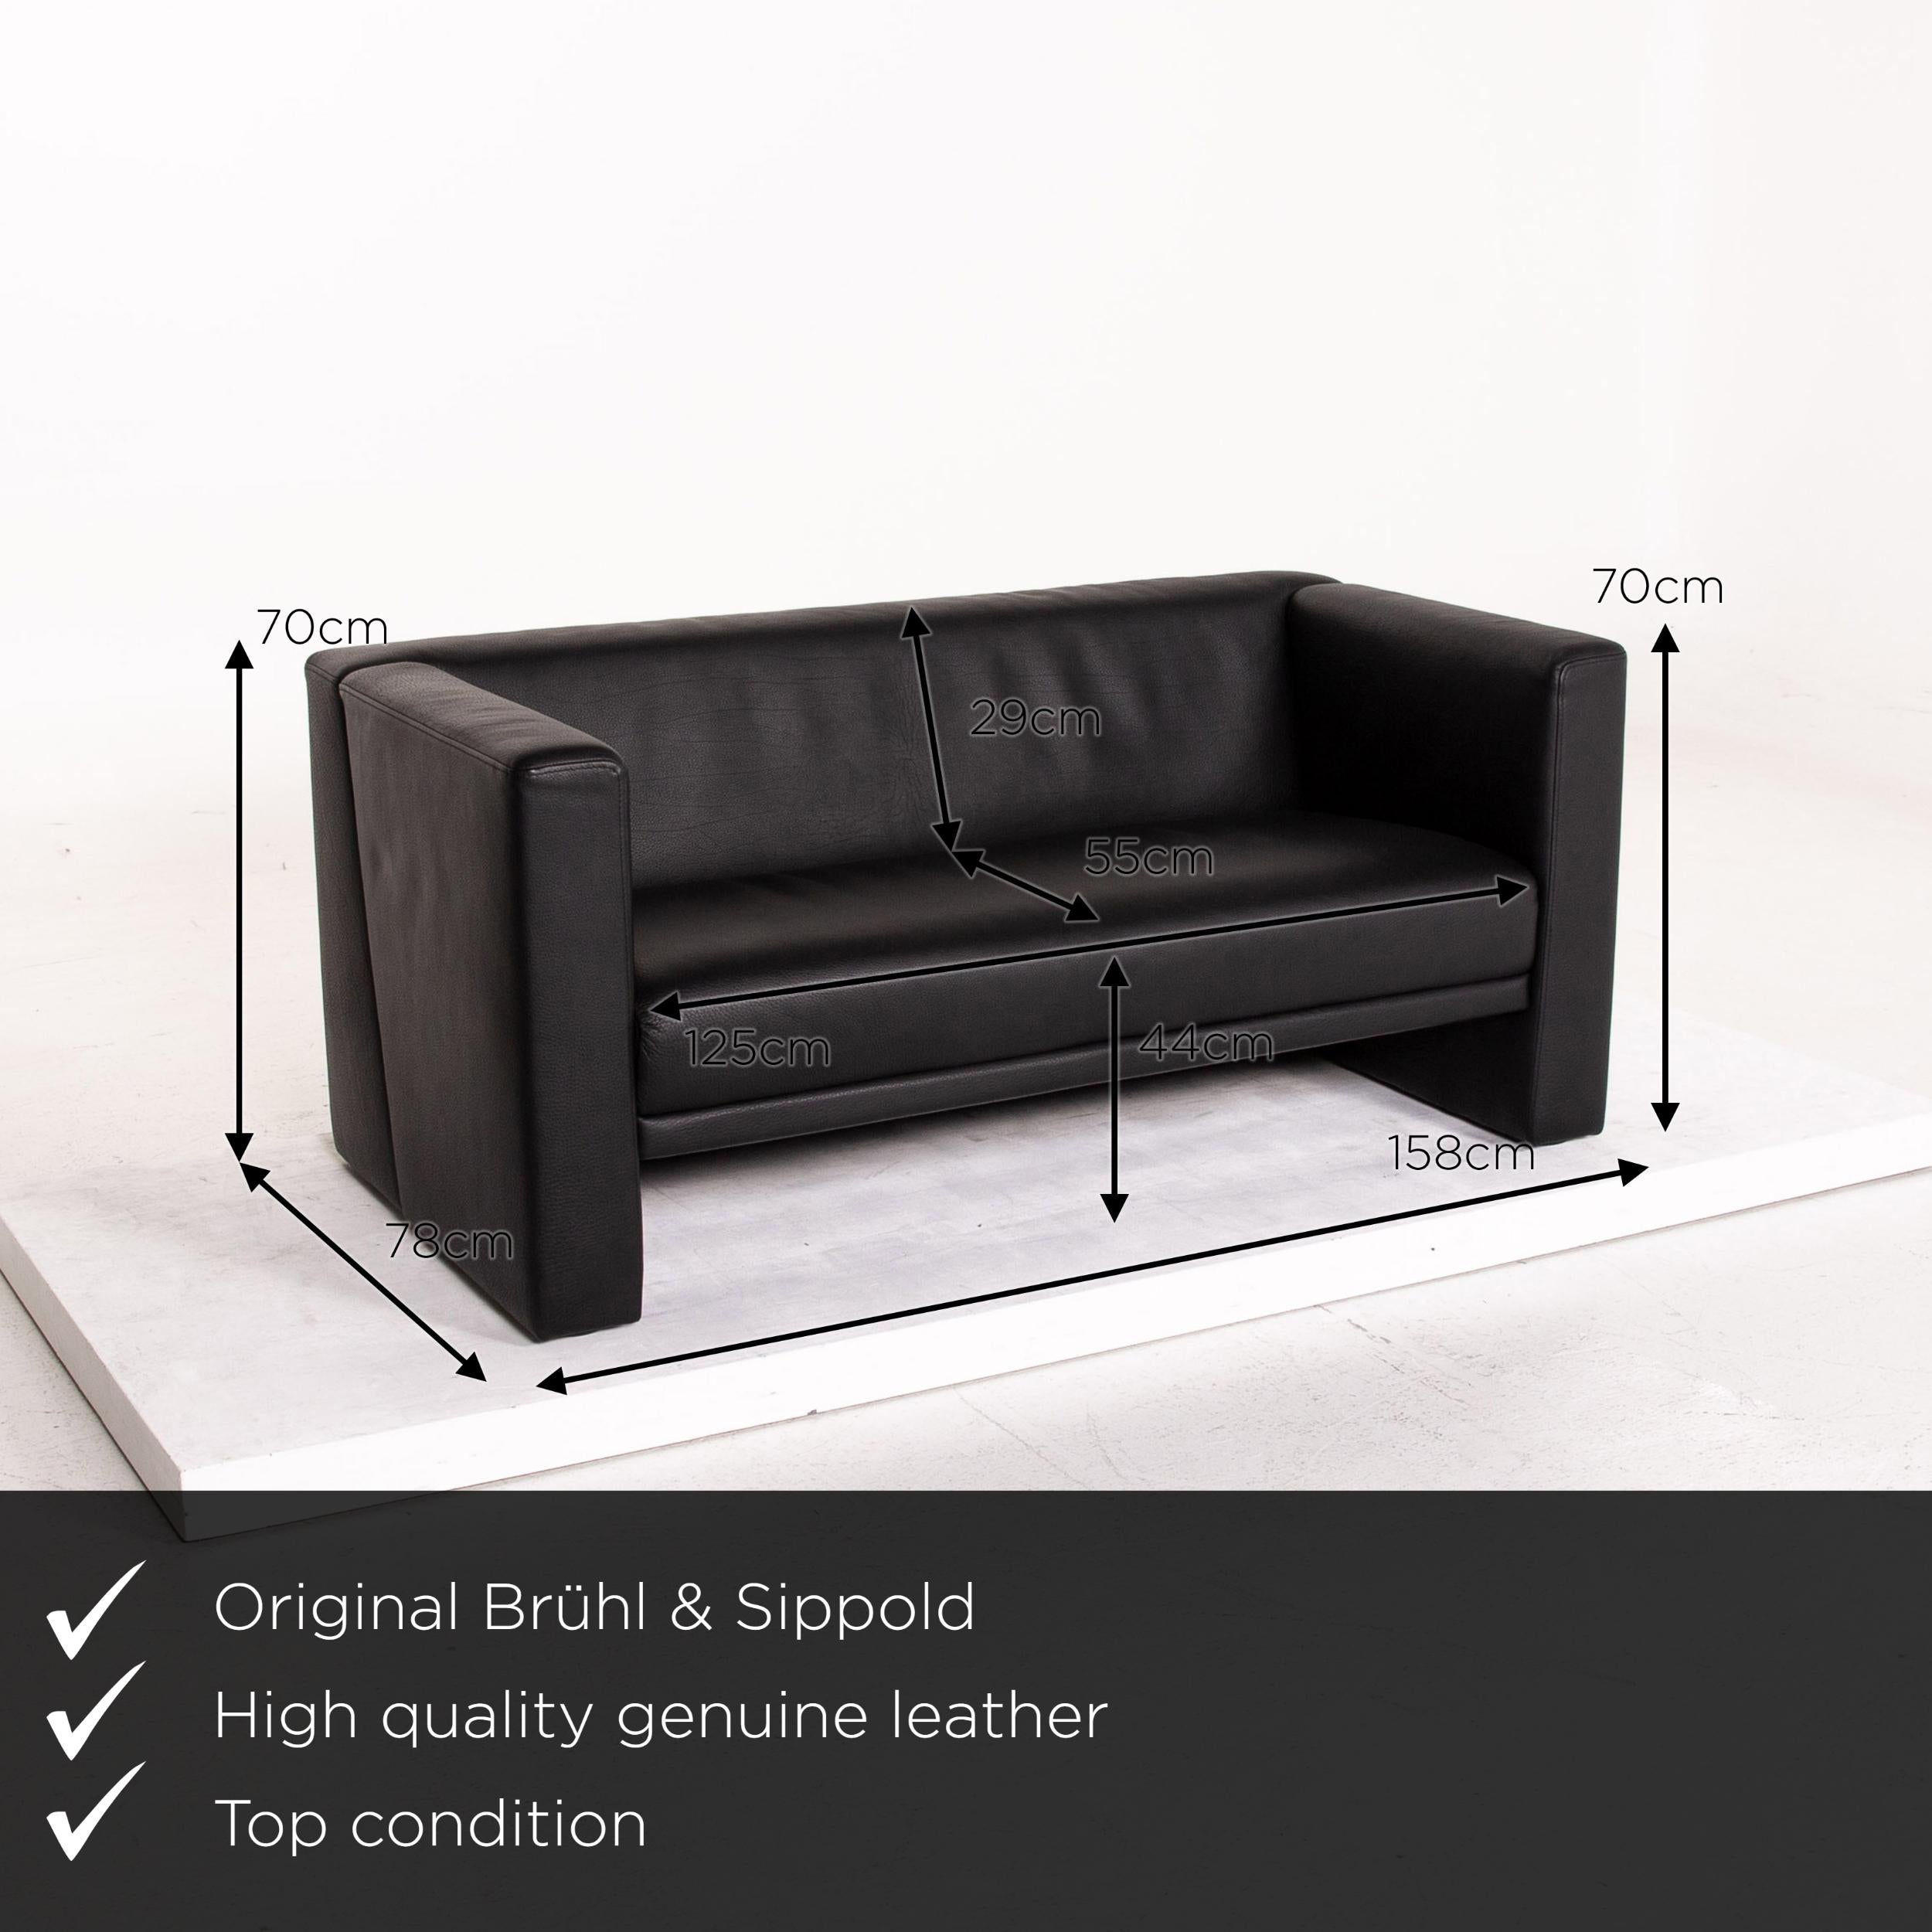 We present to you a Brühl & Sippold Visavis leather sofa black two-seat couch.
 

 Product measurements in centimeters:
 

Depth 78
Width 158
Height 70
Seat height 44
Rest height 70
Seat depth 55
Seat width 125
Back height 29.
 